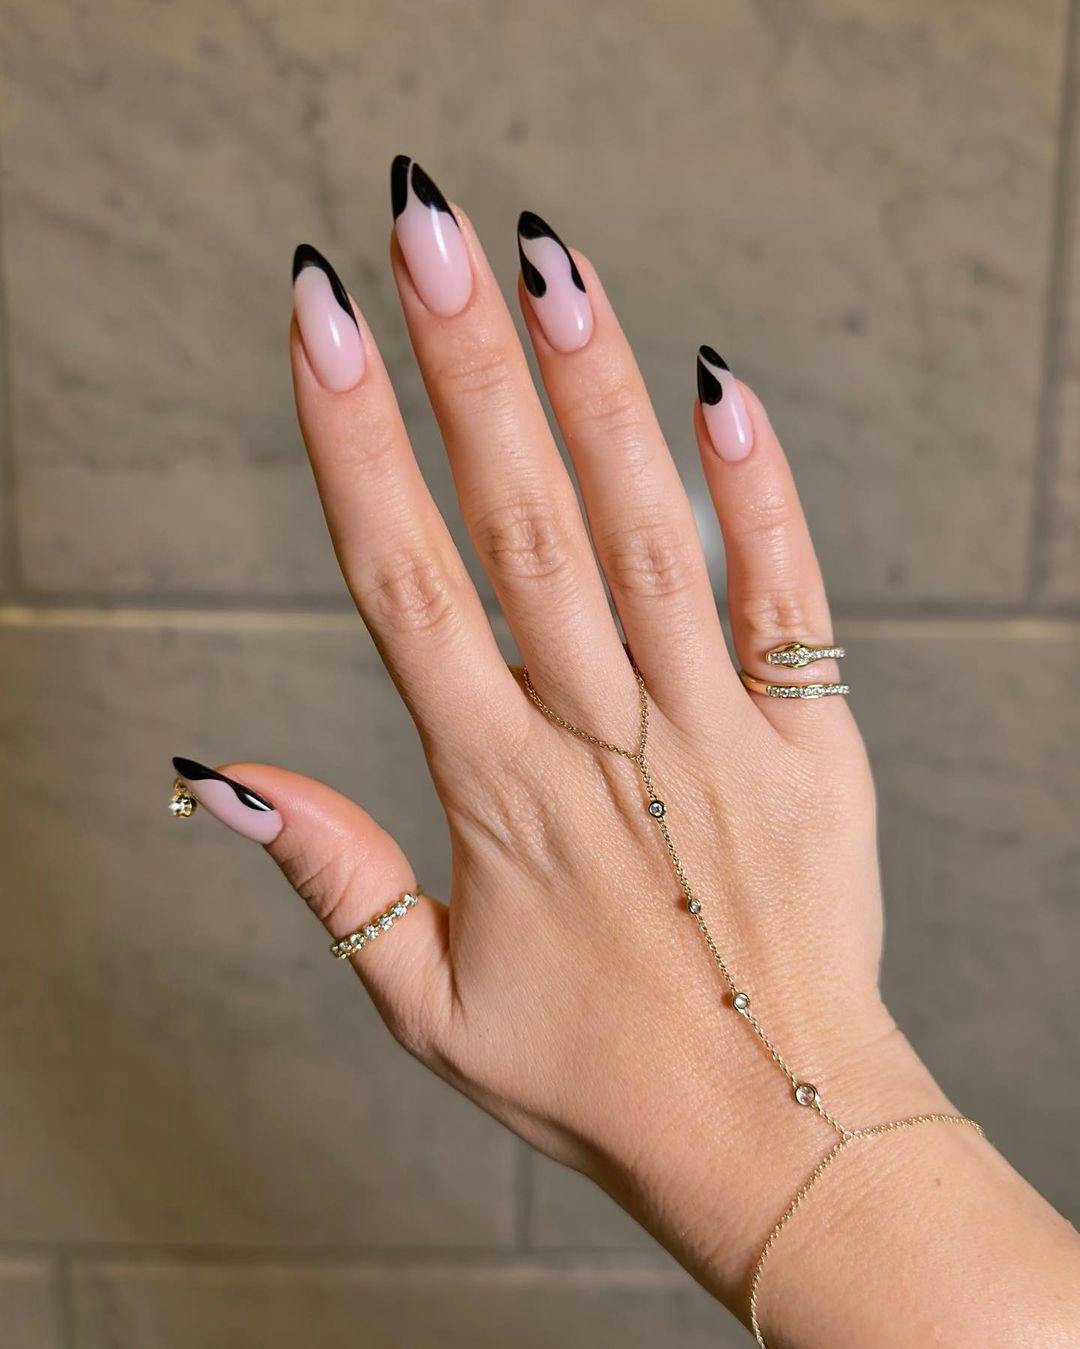 8 Matte Black Nail Ideas To Help You Lean Into The Goth Girl Beauty Trend